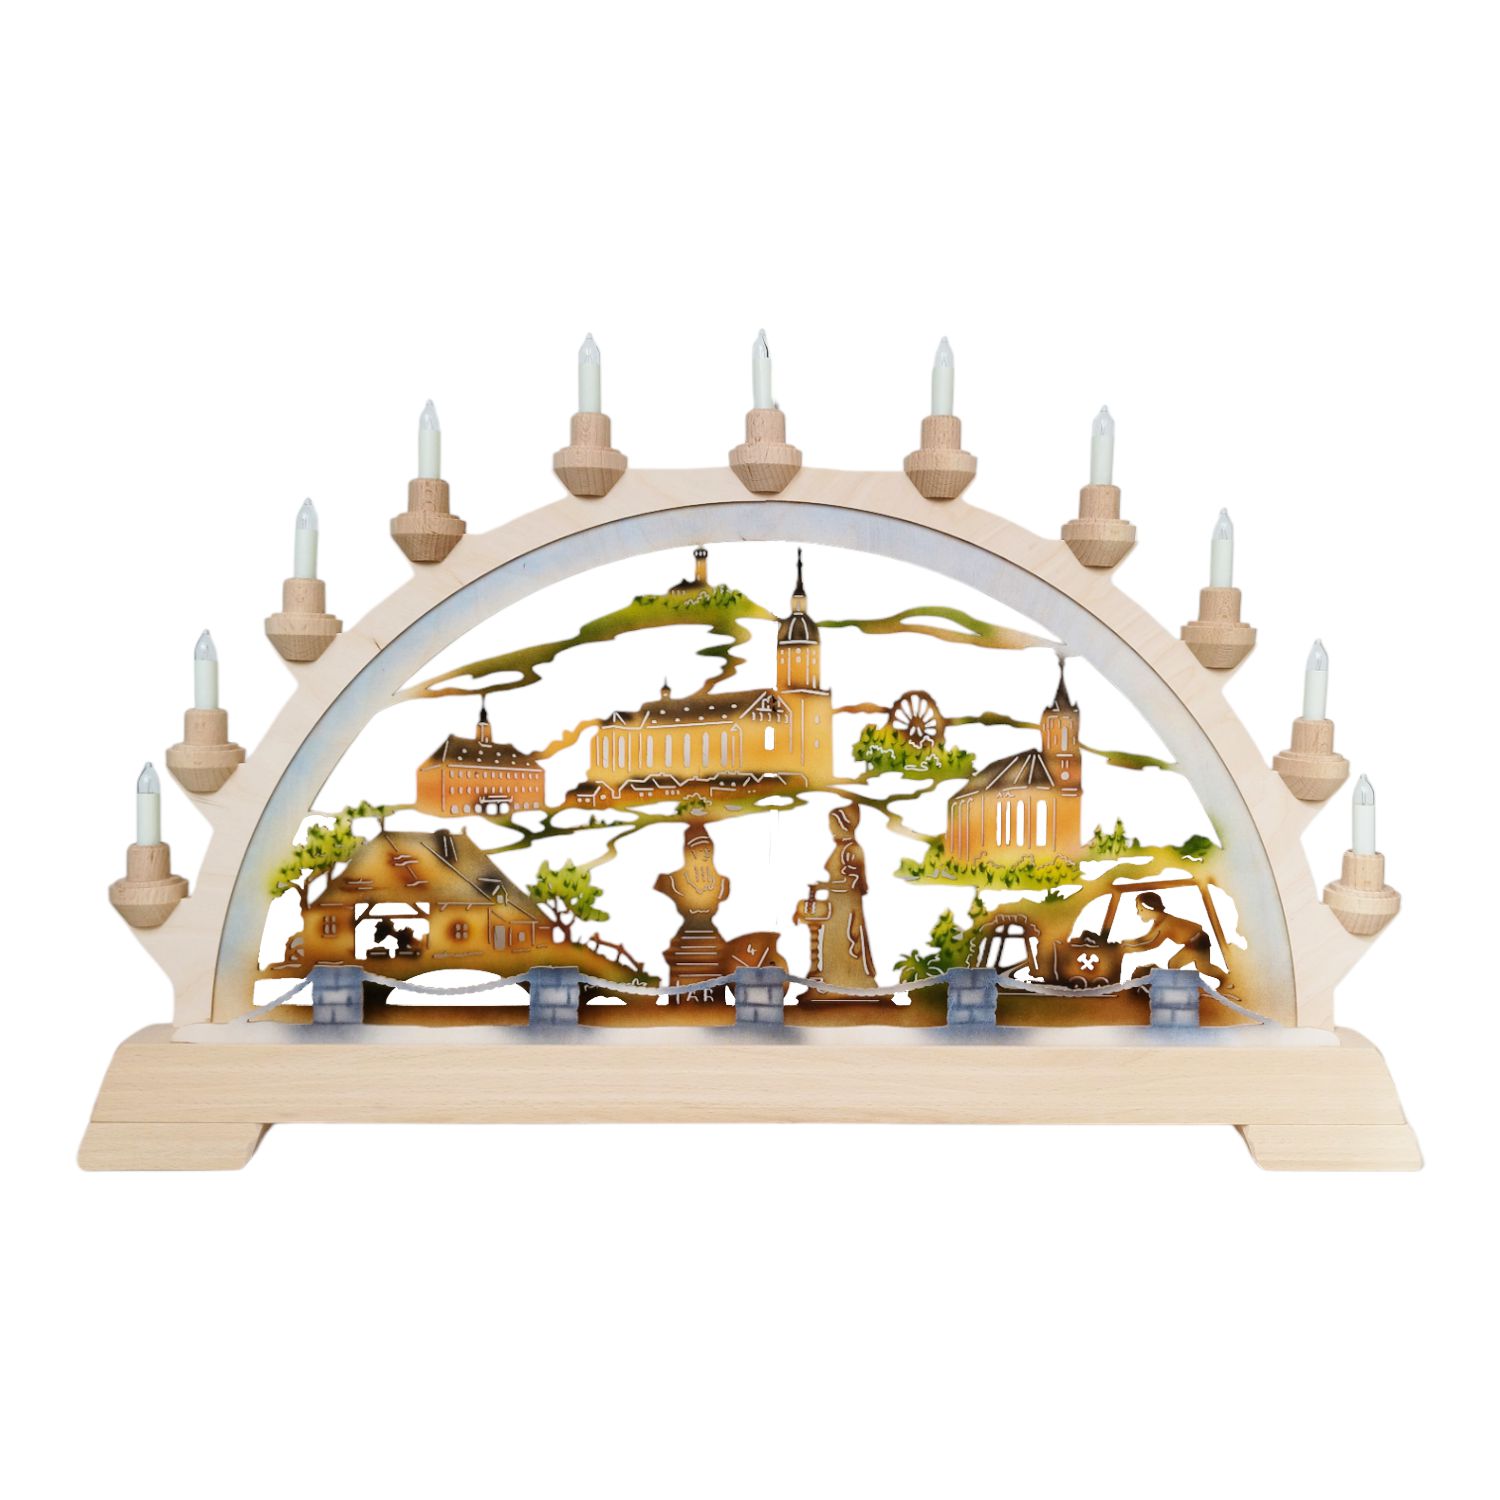 Original Annaberger candle arch, colored